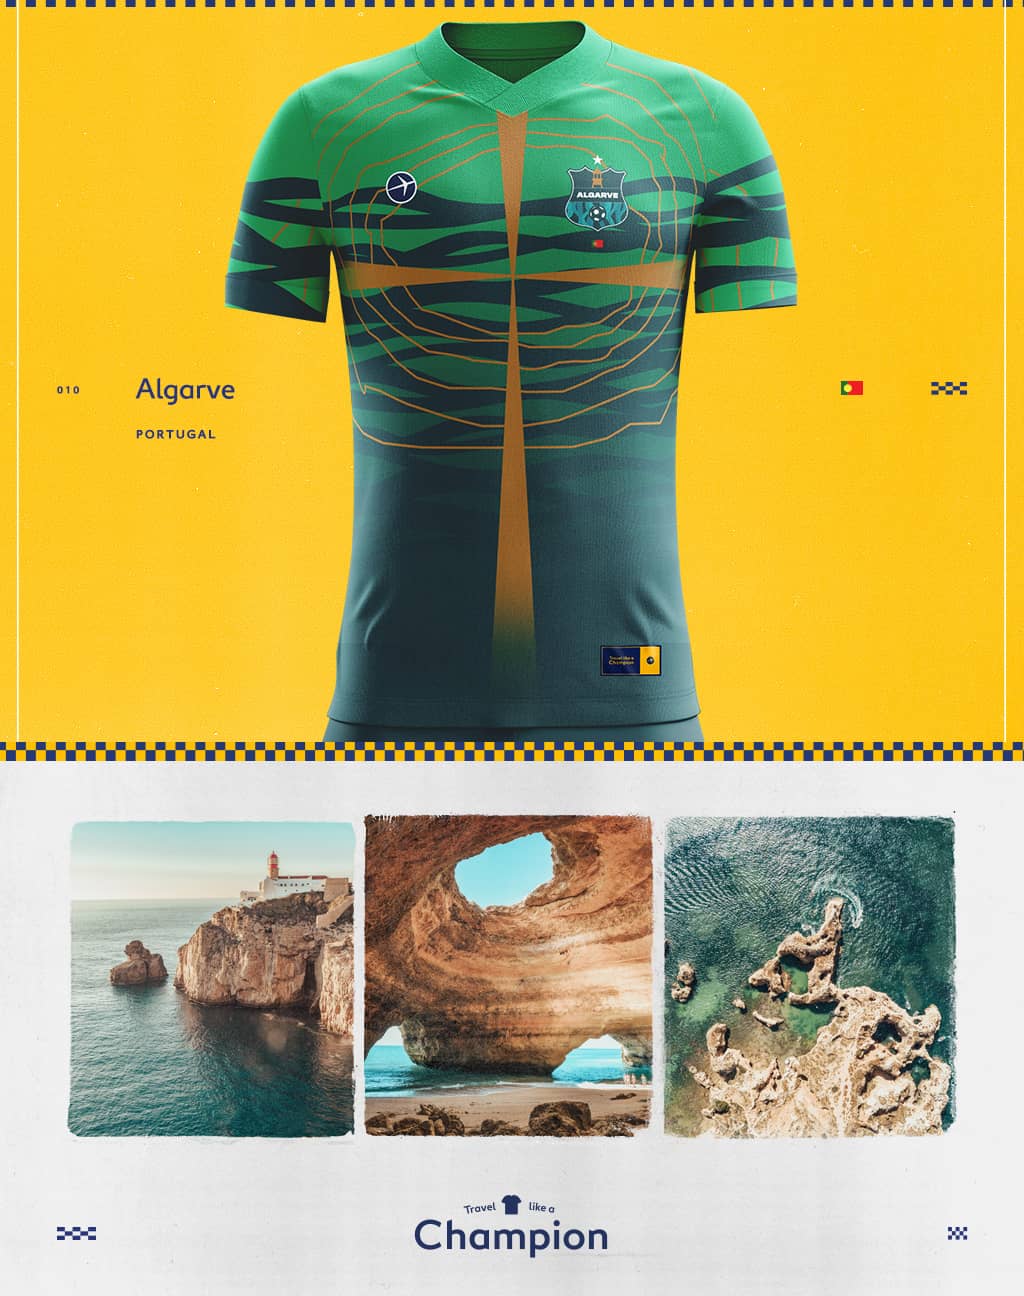 ocean views from Algarve and hte soccer jersey design inspired by them